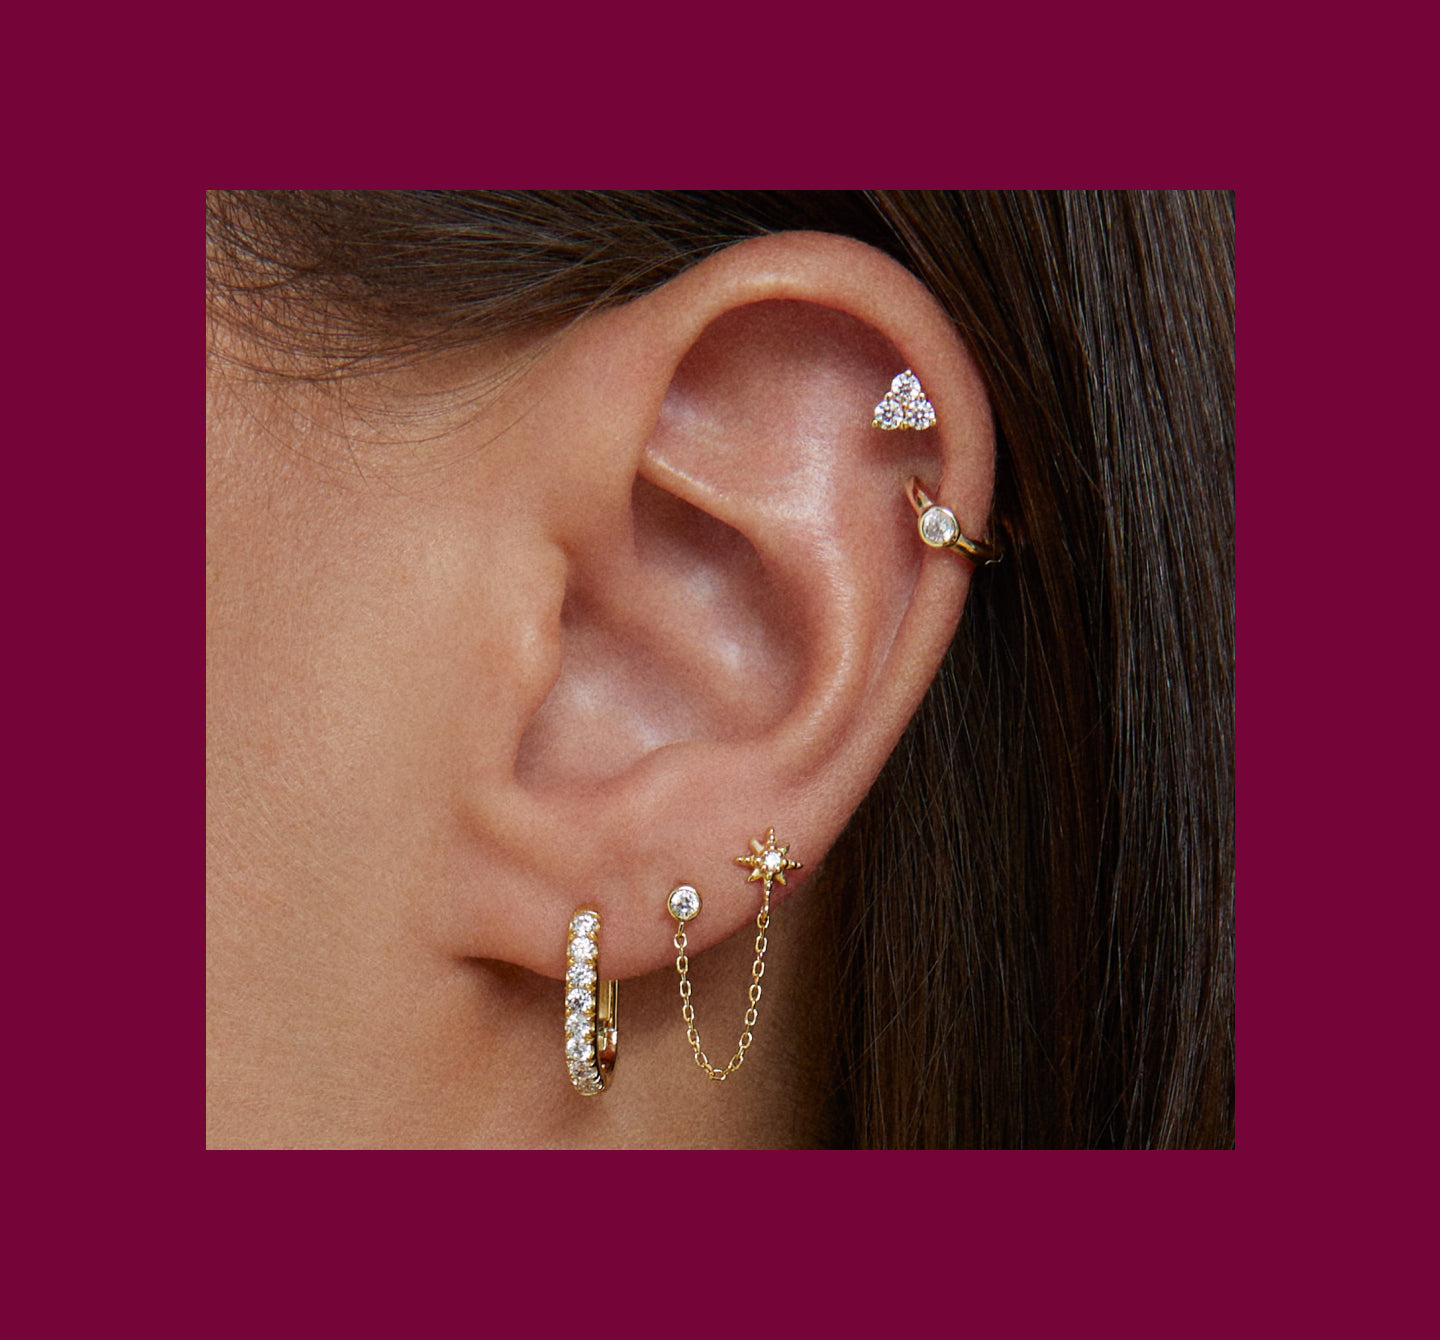 Ear Cuffs | Simple and Bold Cuff Earrings | Uncommon James